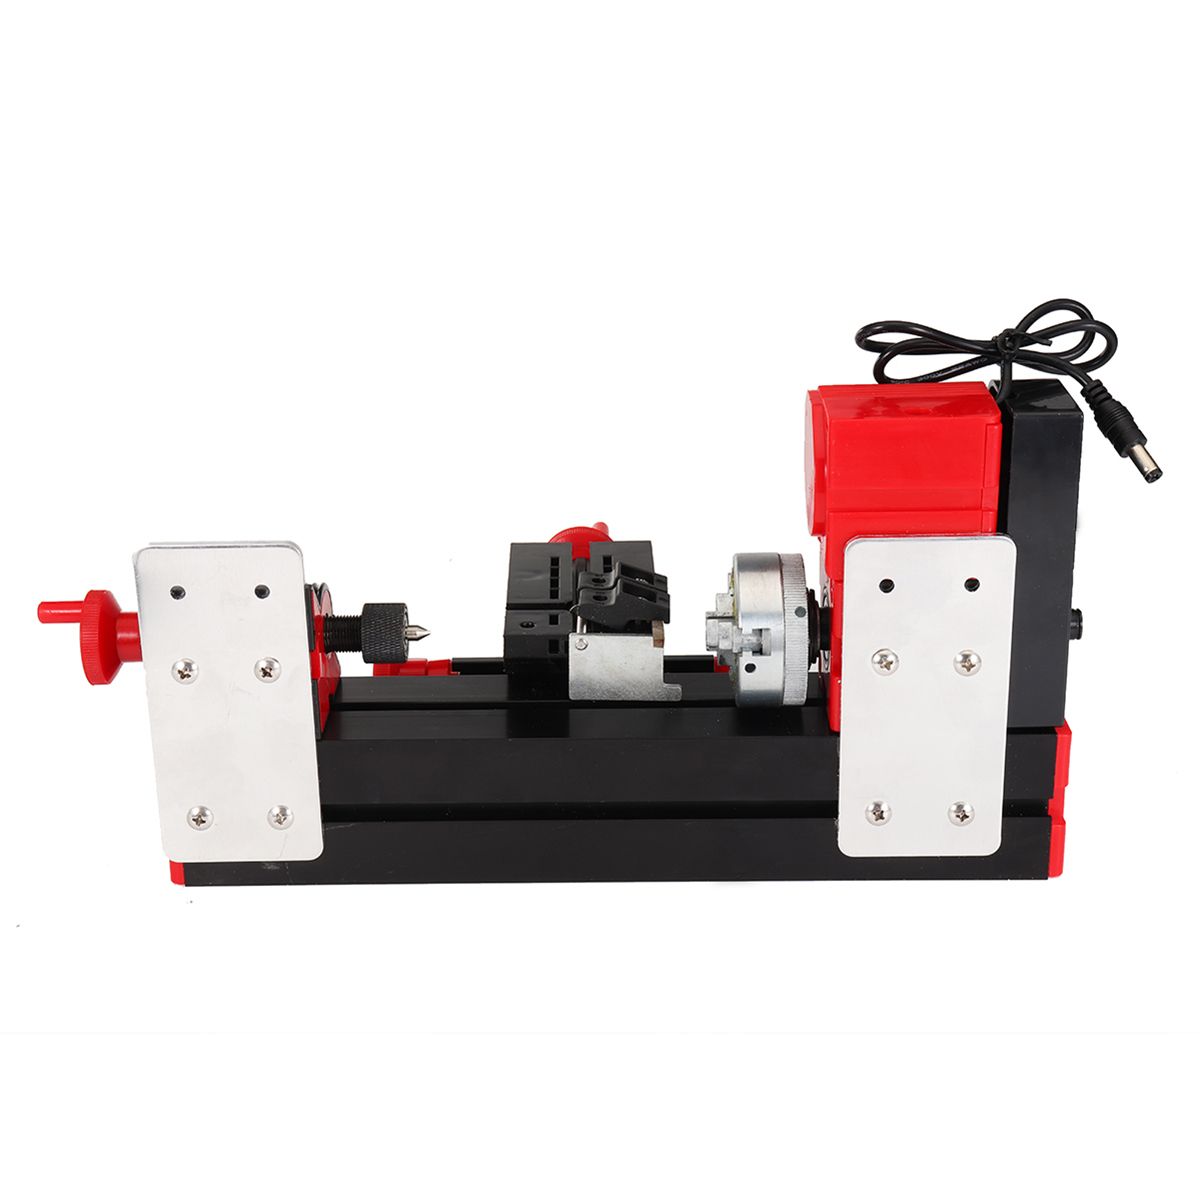 DC-12V-3A-36W-Mini-Lathe-Milling-Machine-Bench-Drill-DIY-Woodworking-Power-Tool-1295550